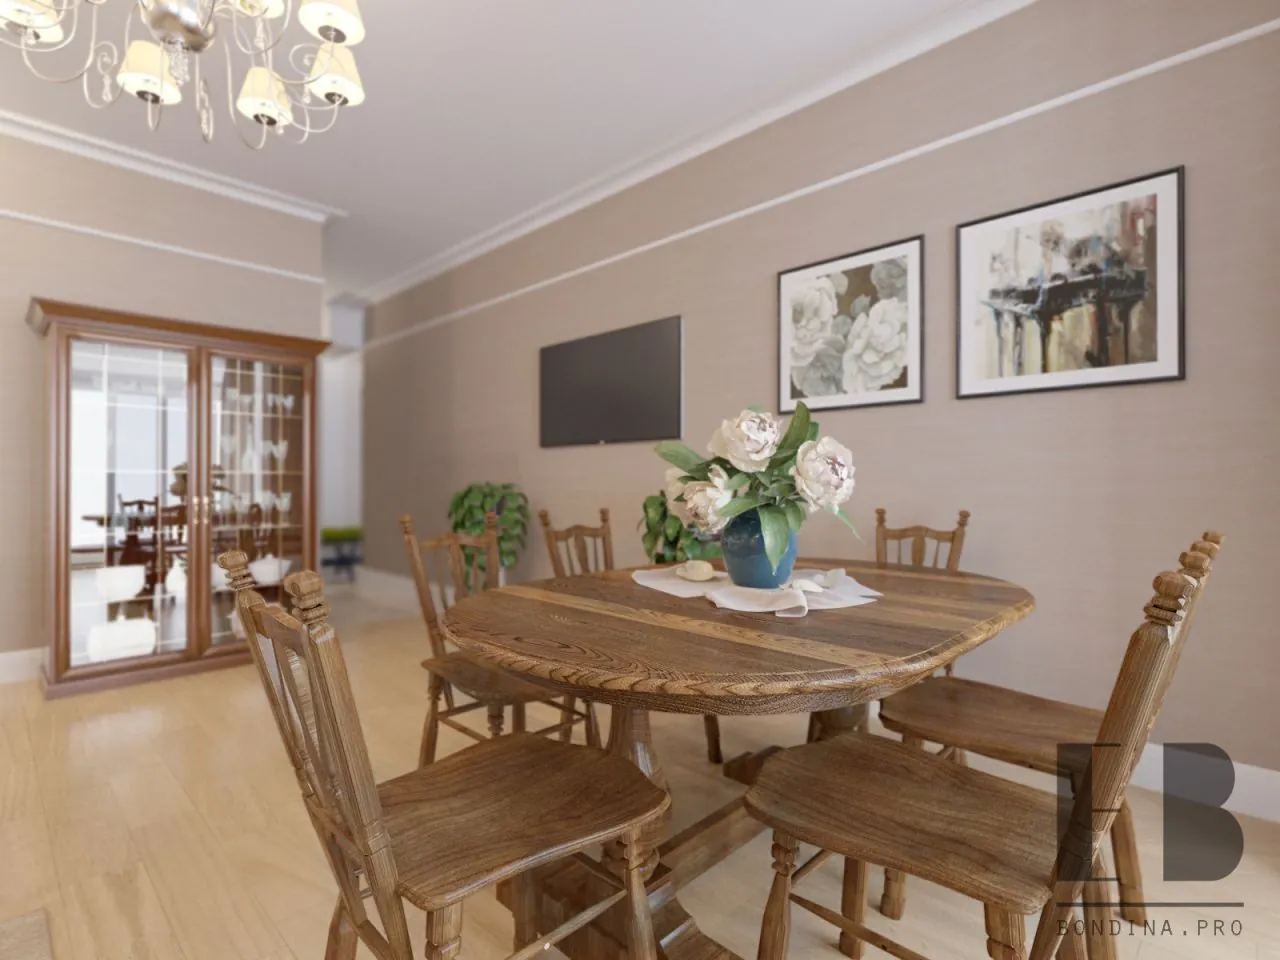 Dining room design in beige color with wooden capboard, table and chairs 